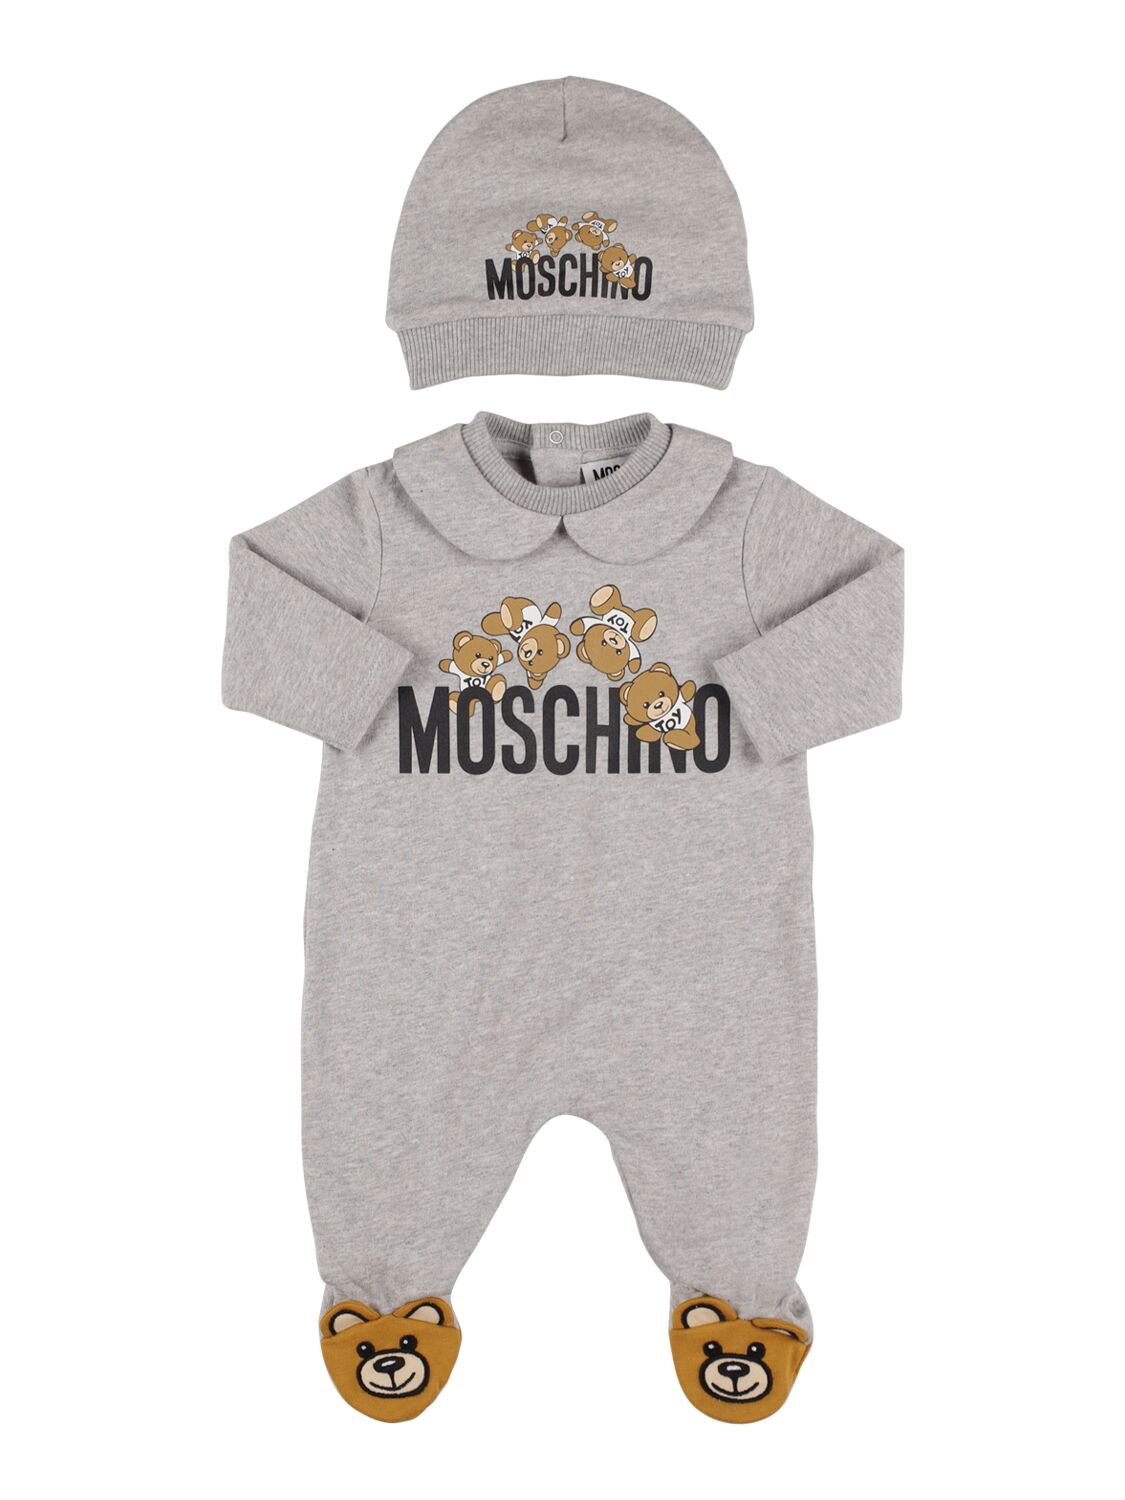 Moschino Babies' Cotton Jersey Romper & Hat In Grey